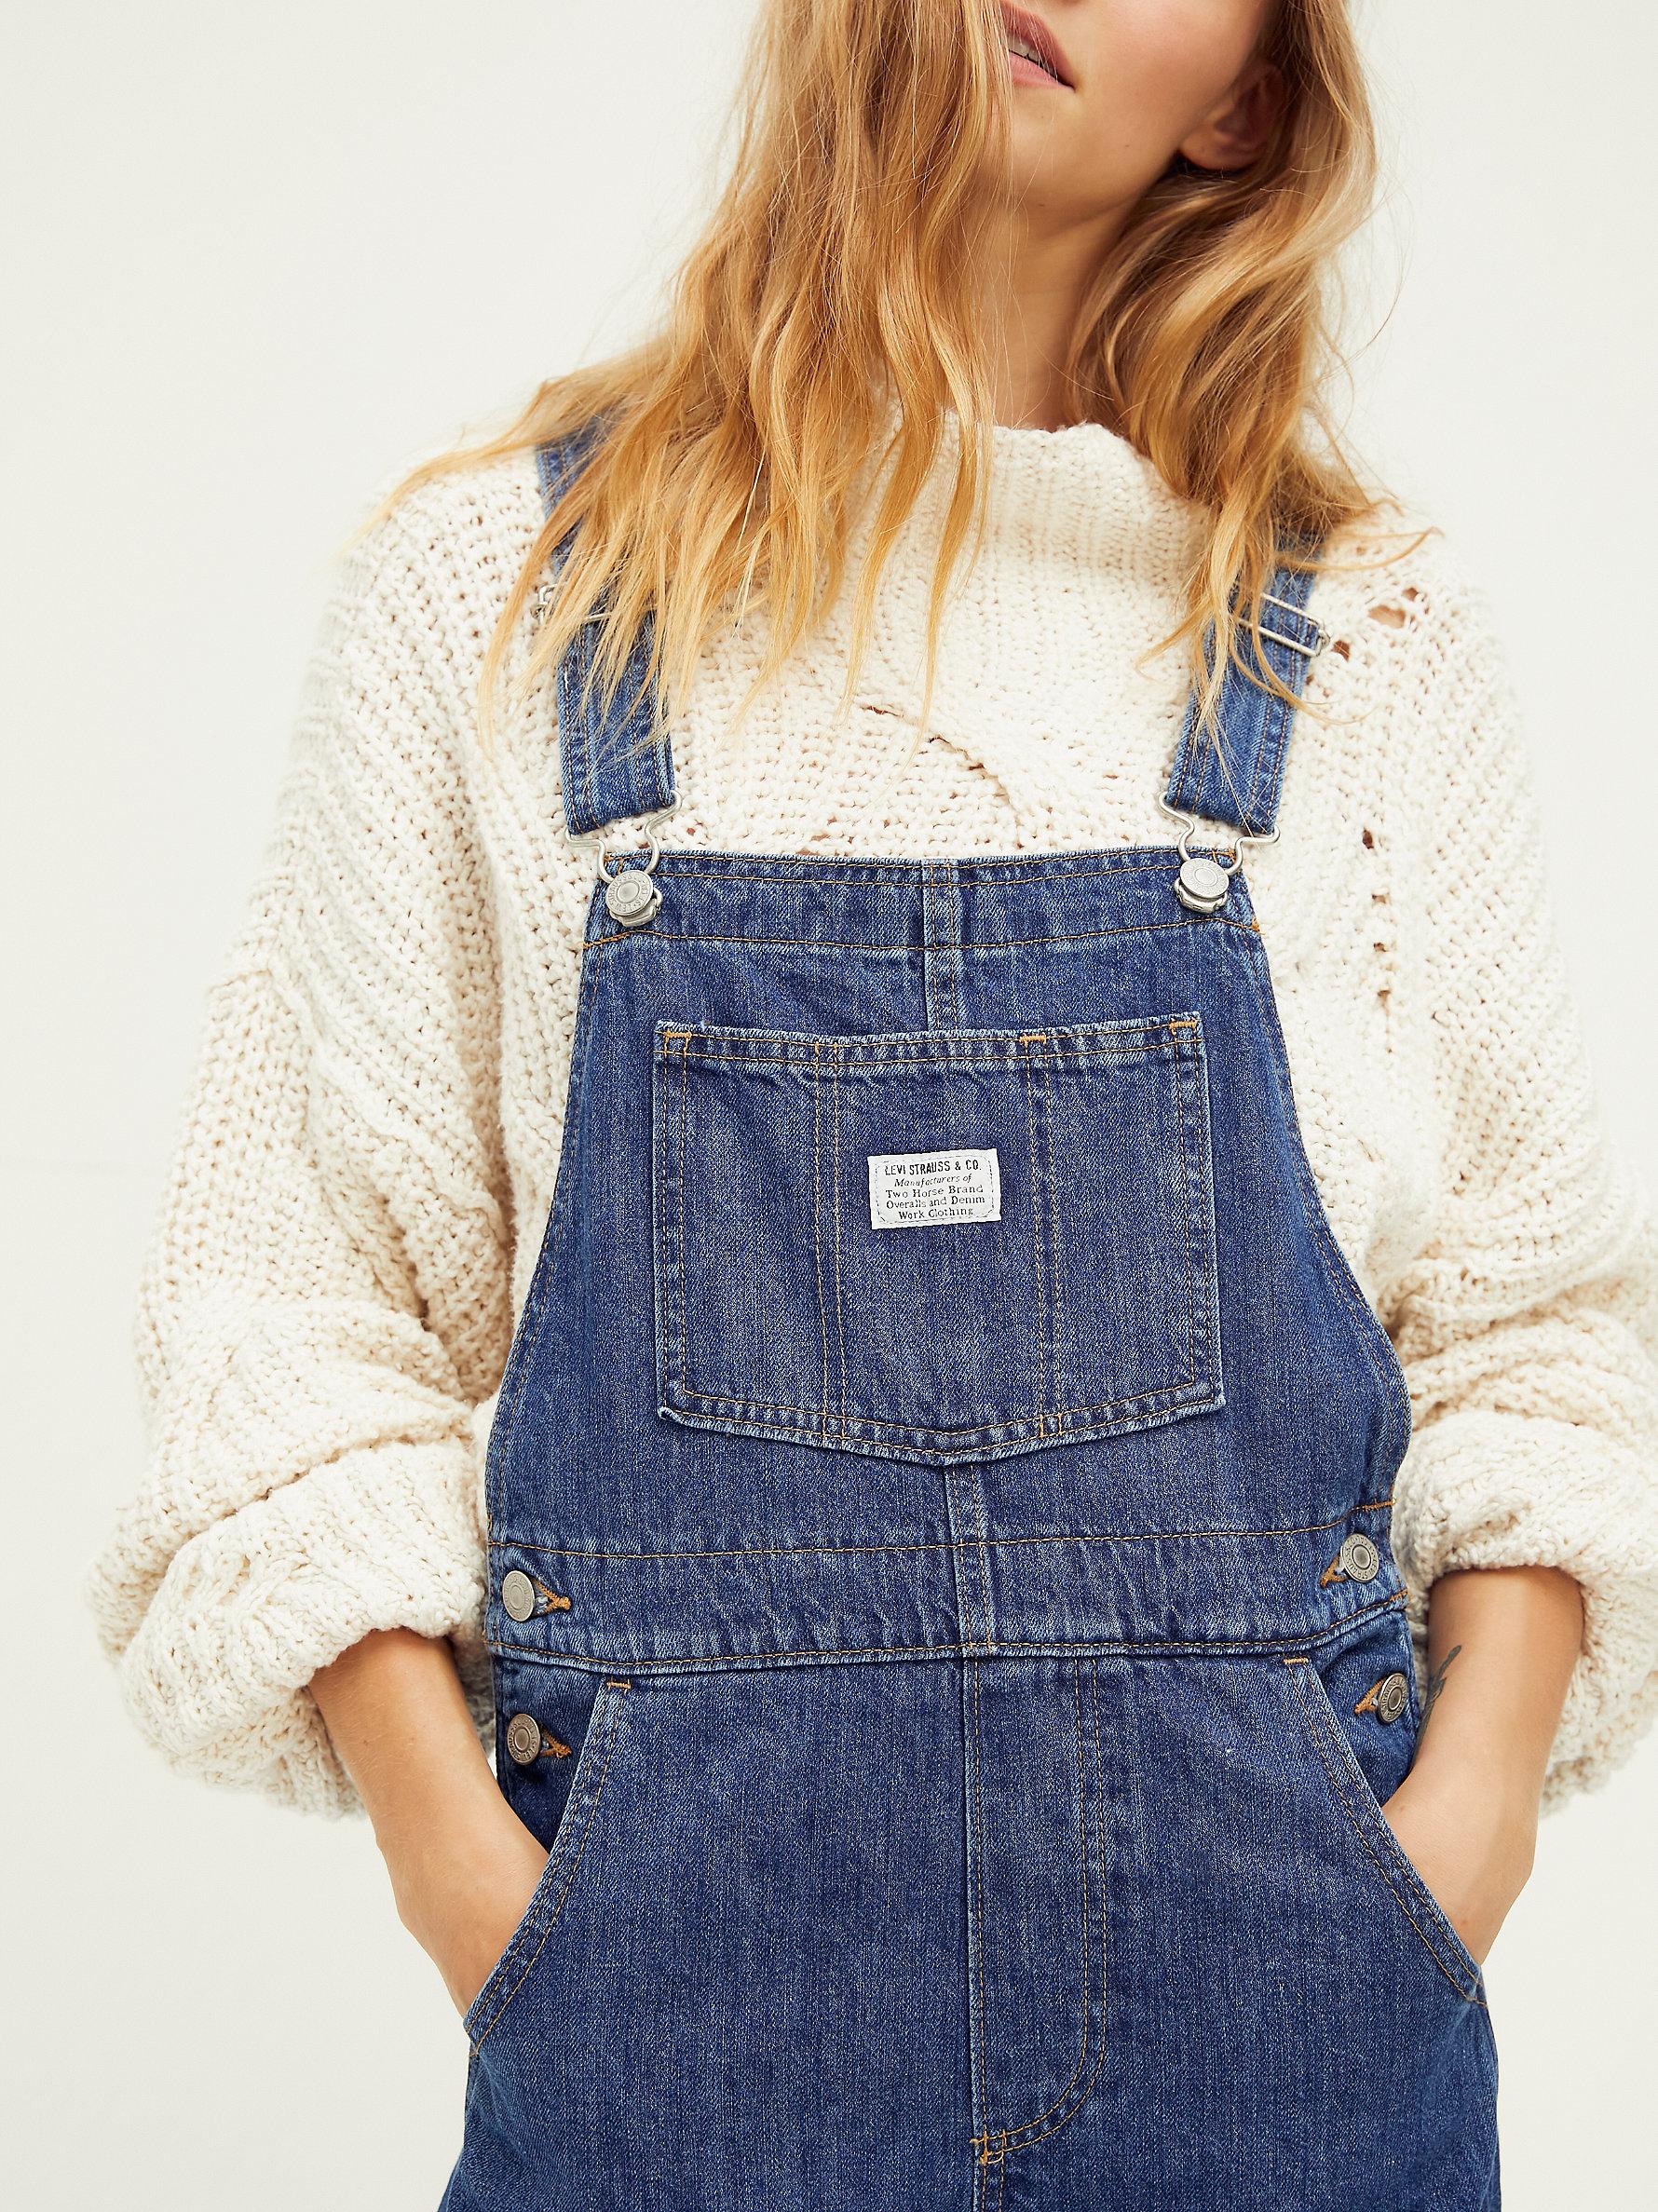 Free People Levi's Vintage Overalls in Blue | Lyst